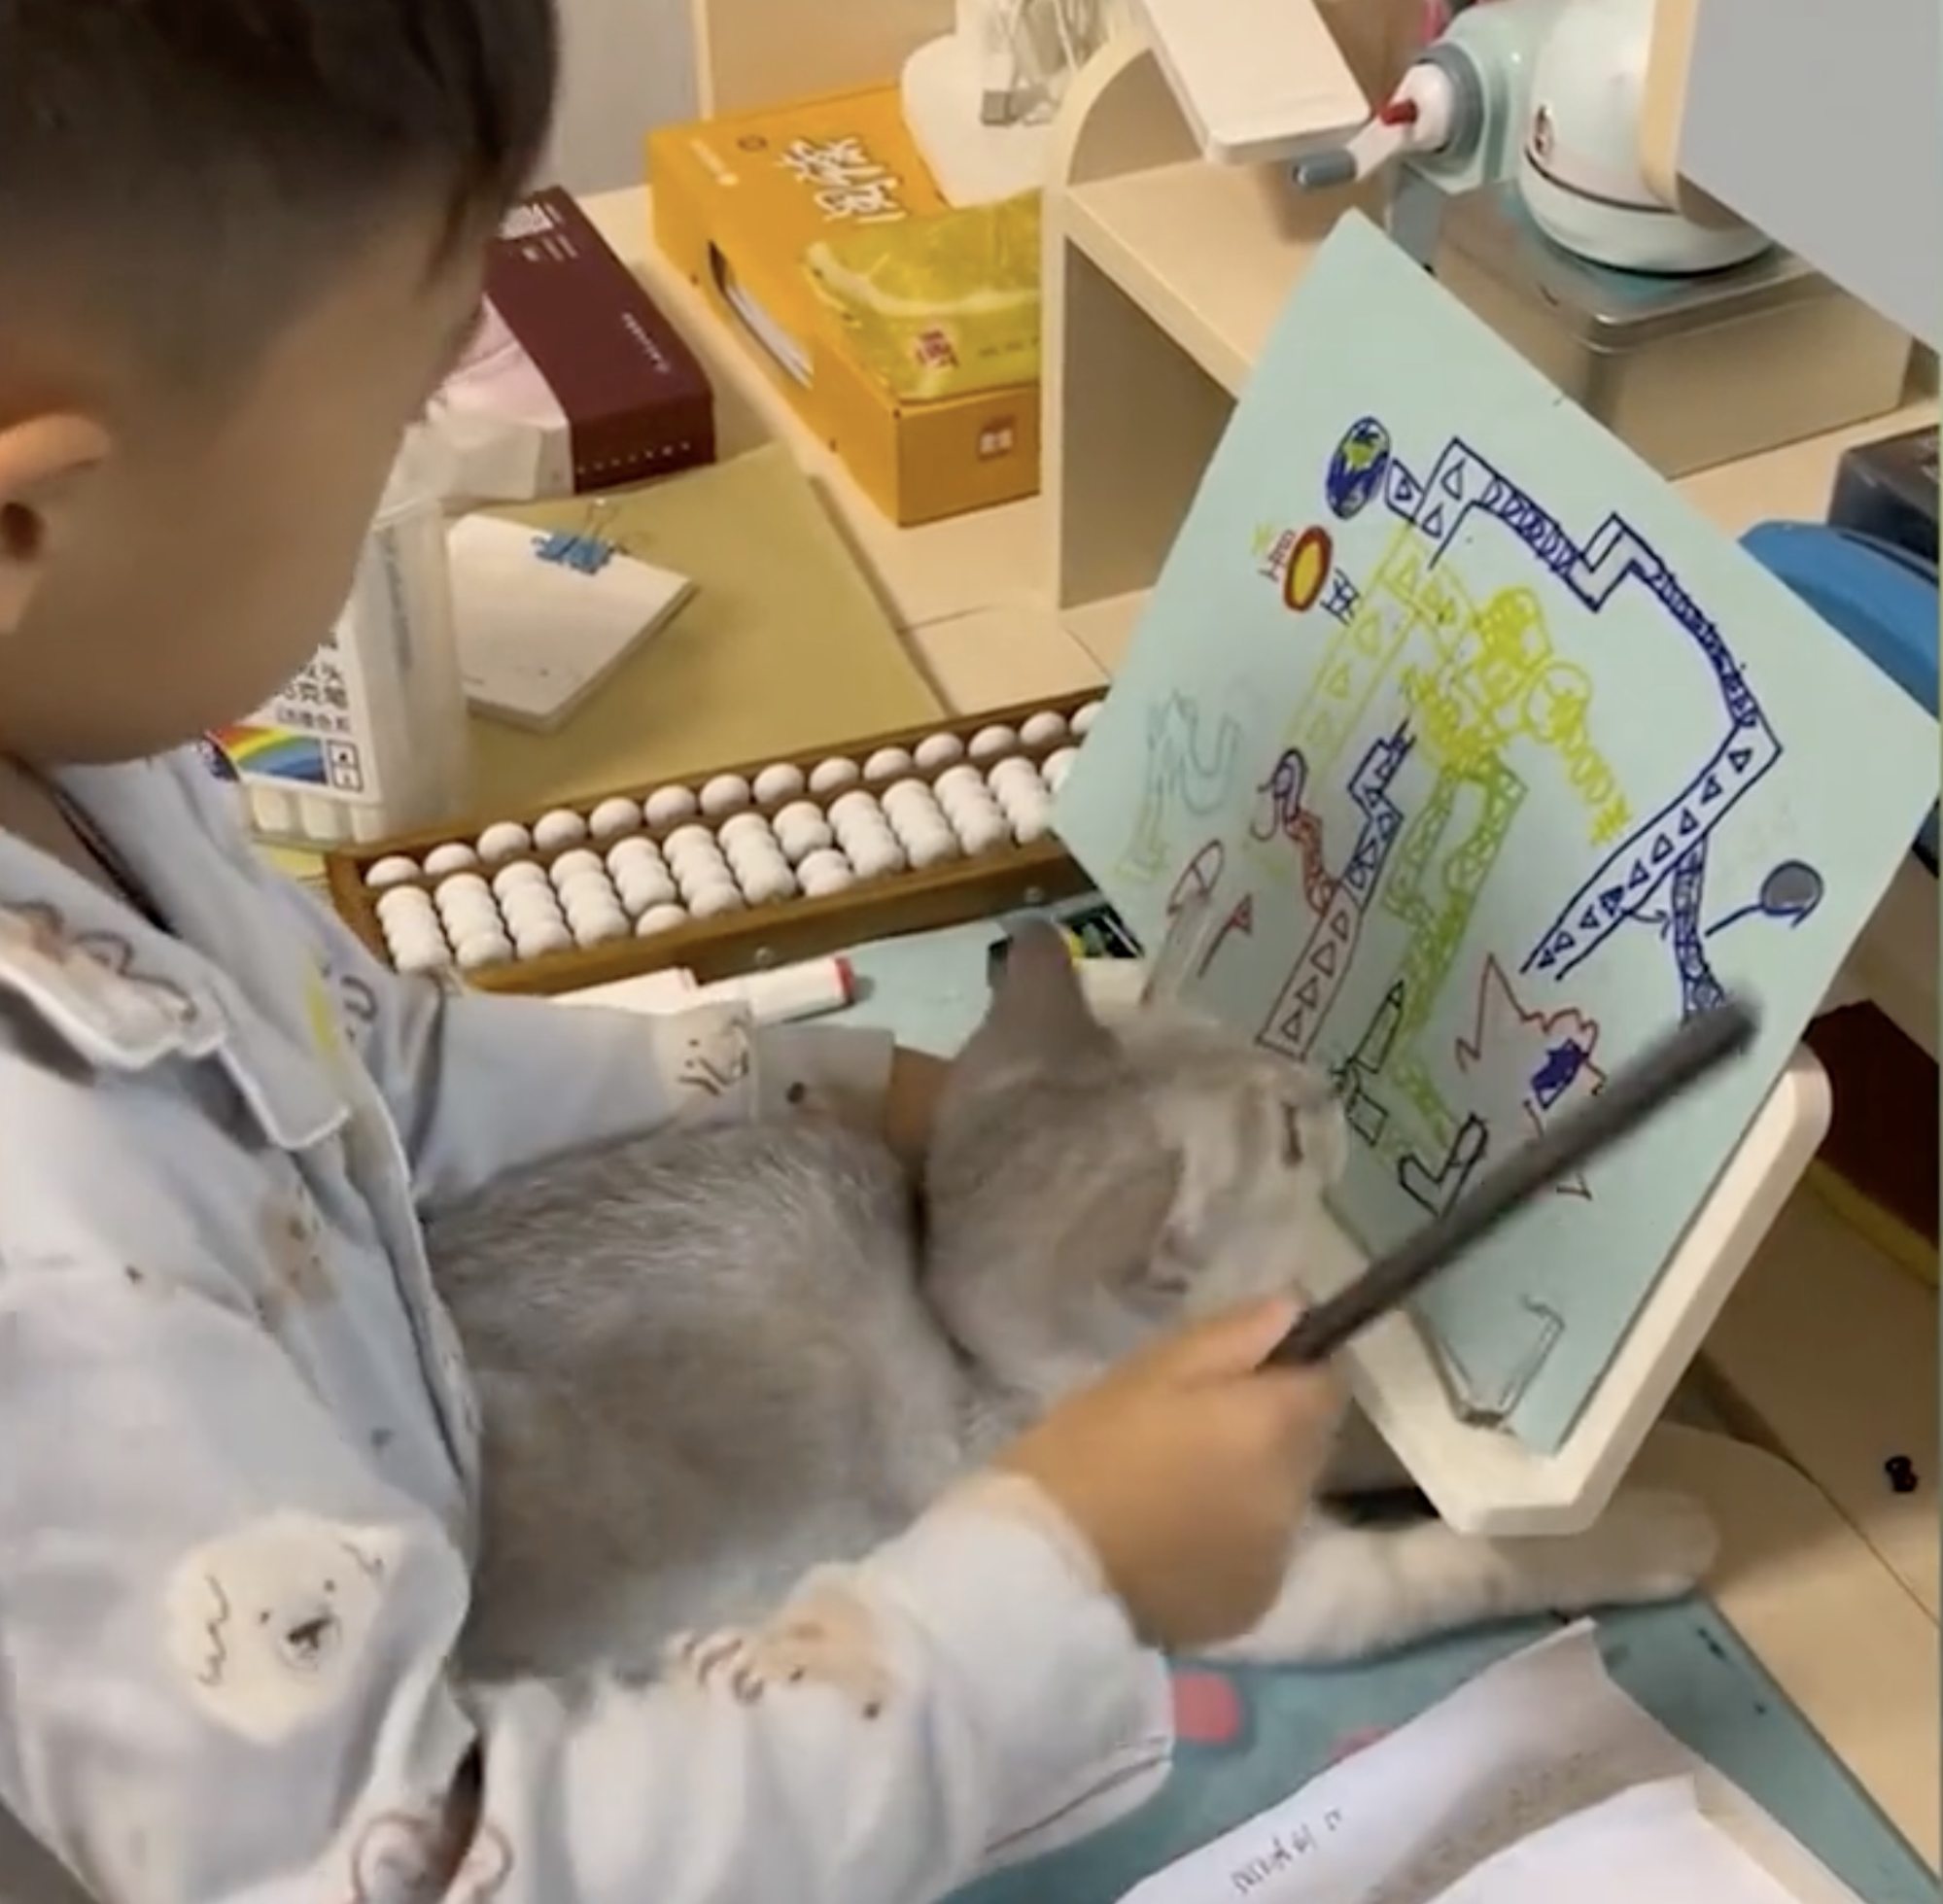 Among the criticisms levelled at the boy’s parents were comments about responsible pet ownership and questions about why they had not researched the cat before they committed to owning it. Photo: Douyin